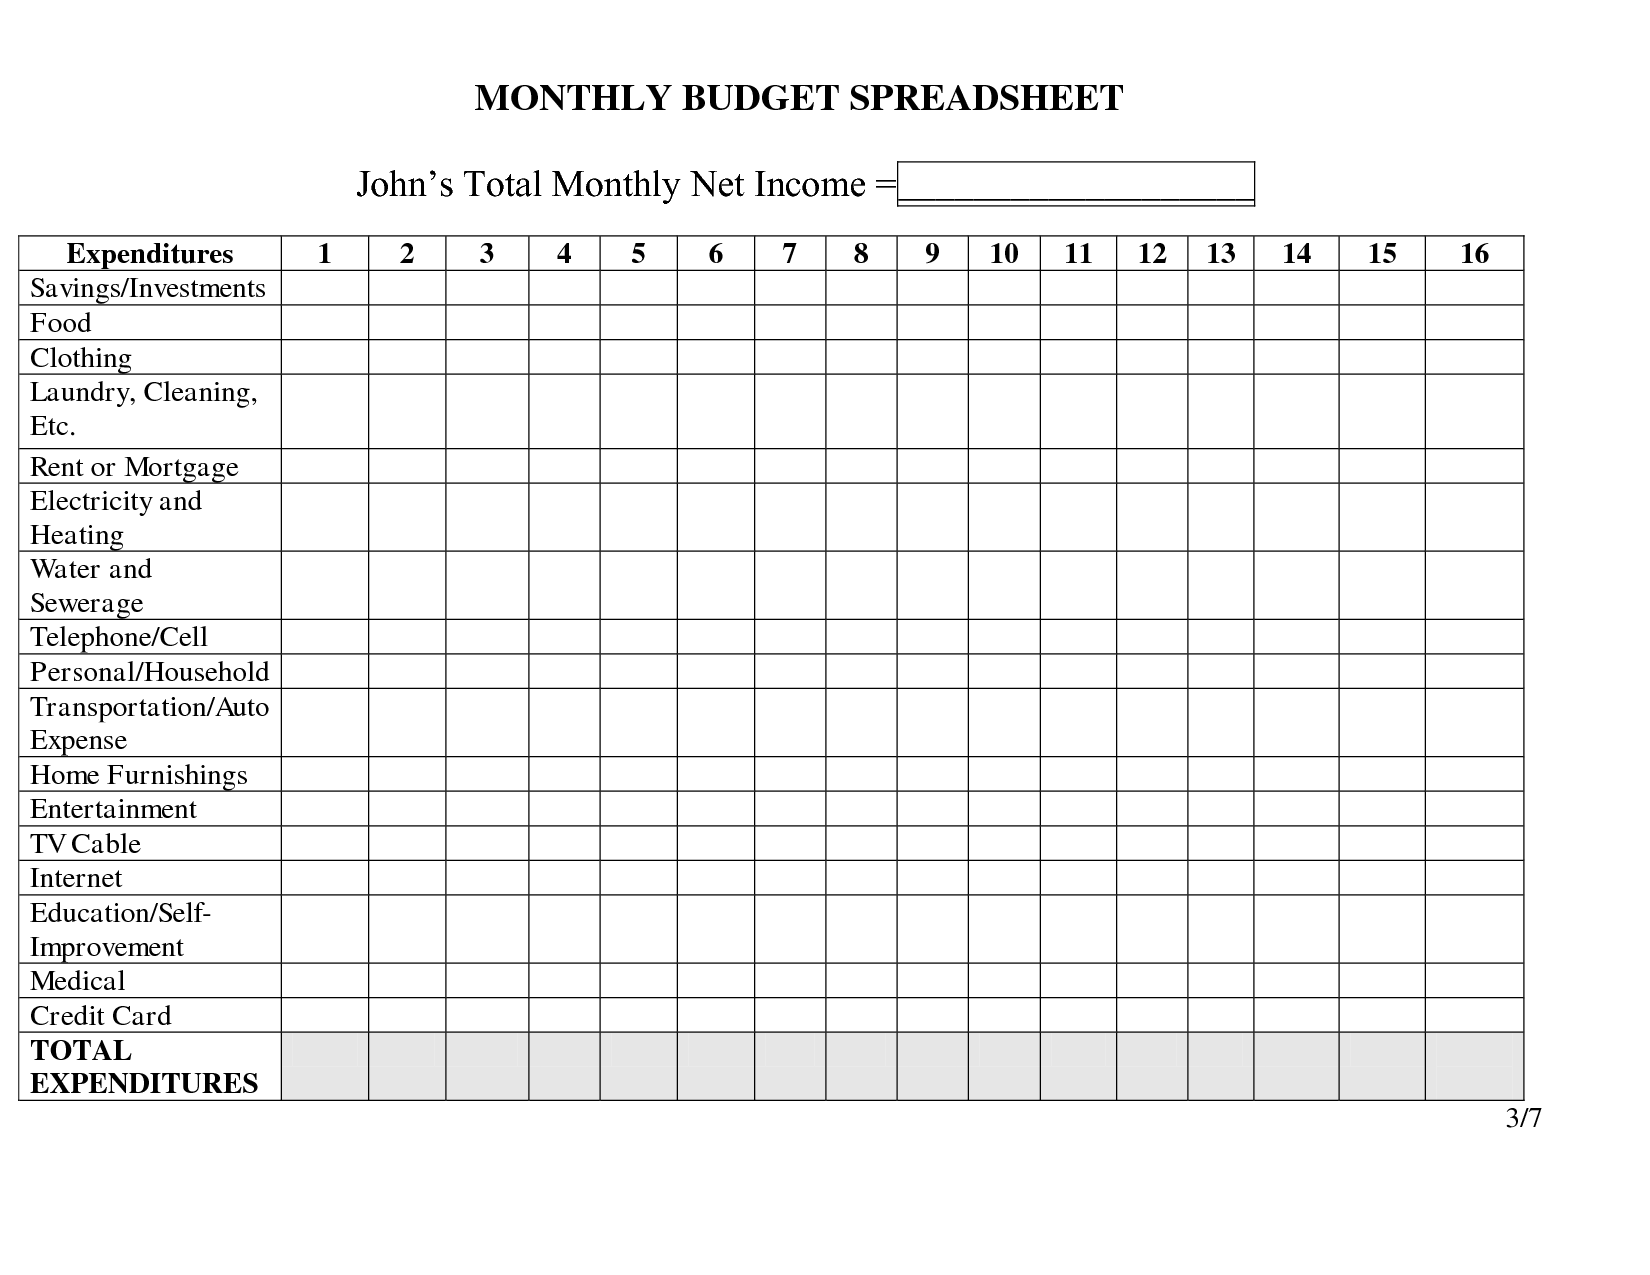 Blank Monthly Budget Spreadsheet Image